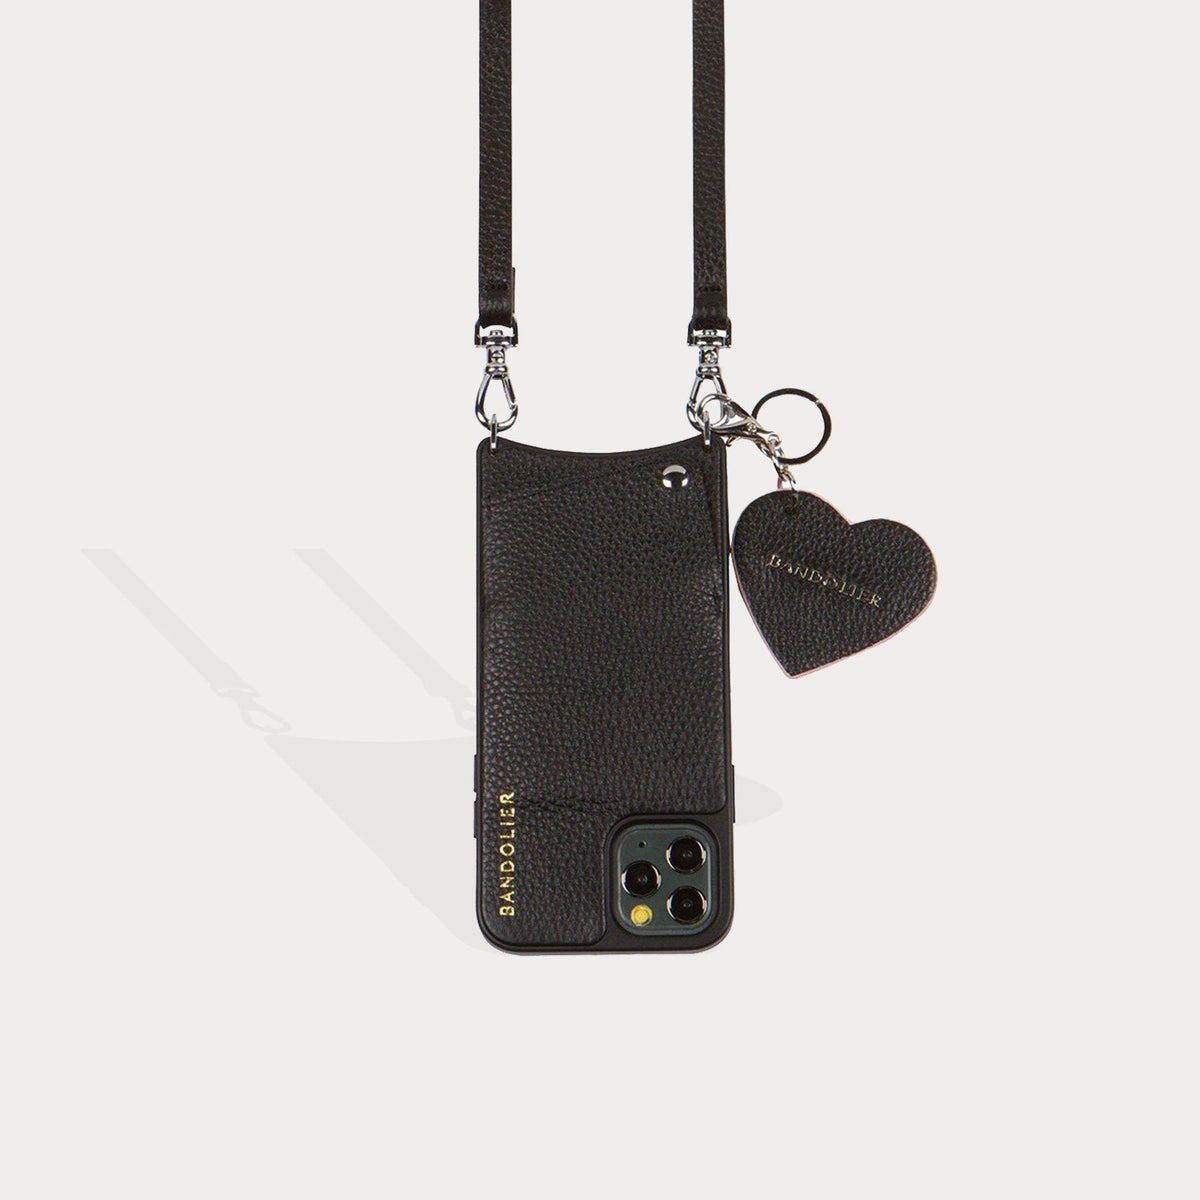 BeeInStyle Heart Key Holder and Charm